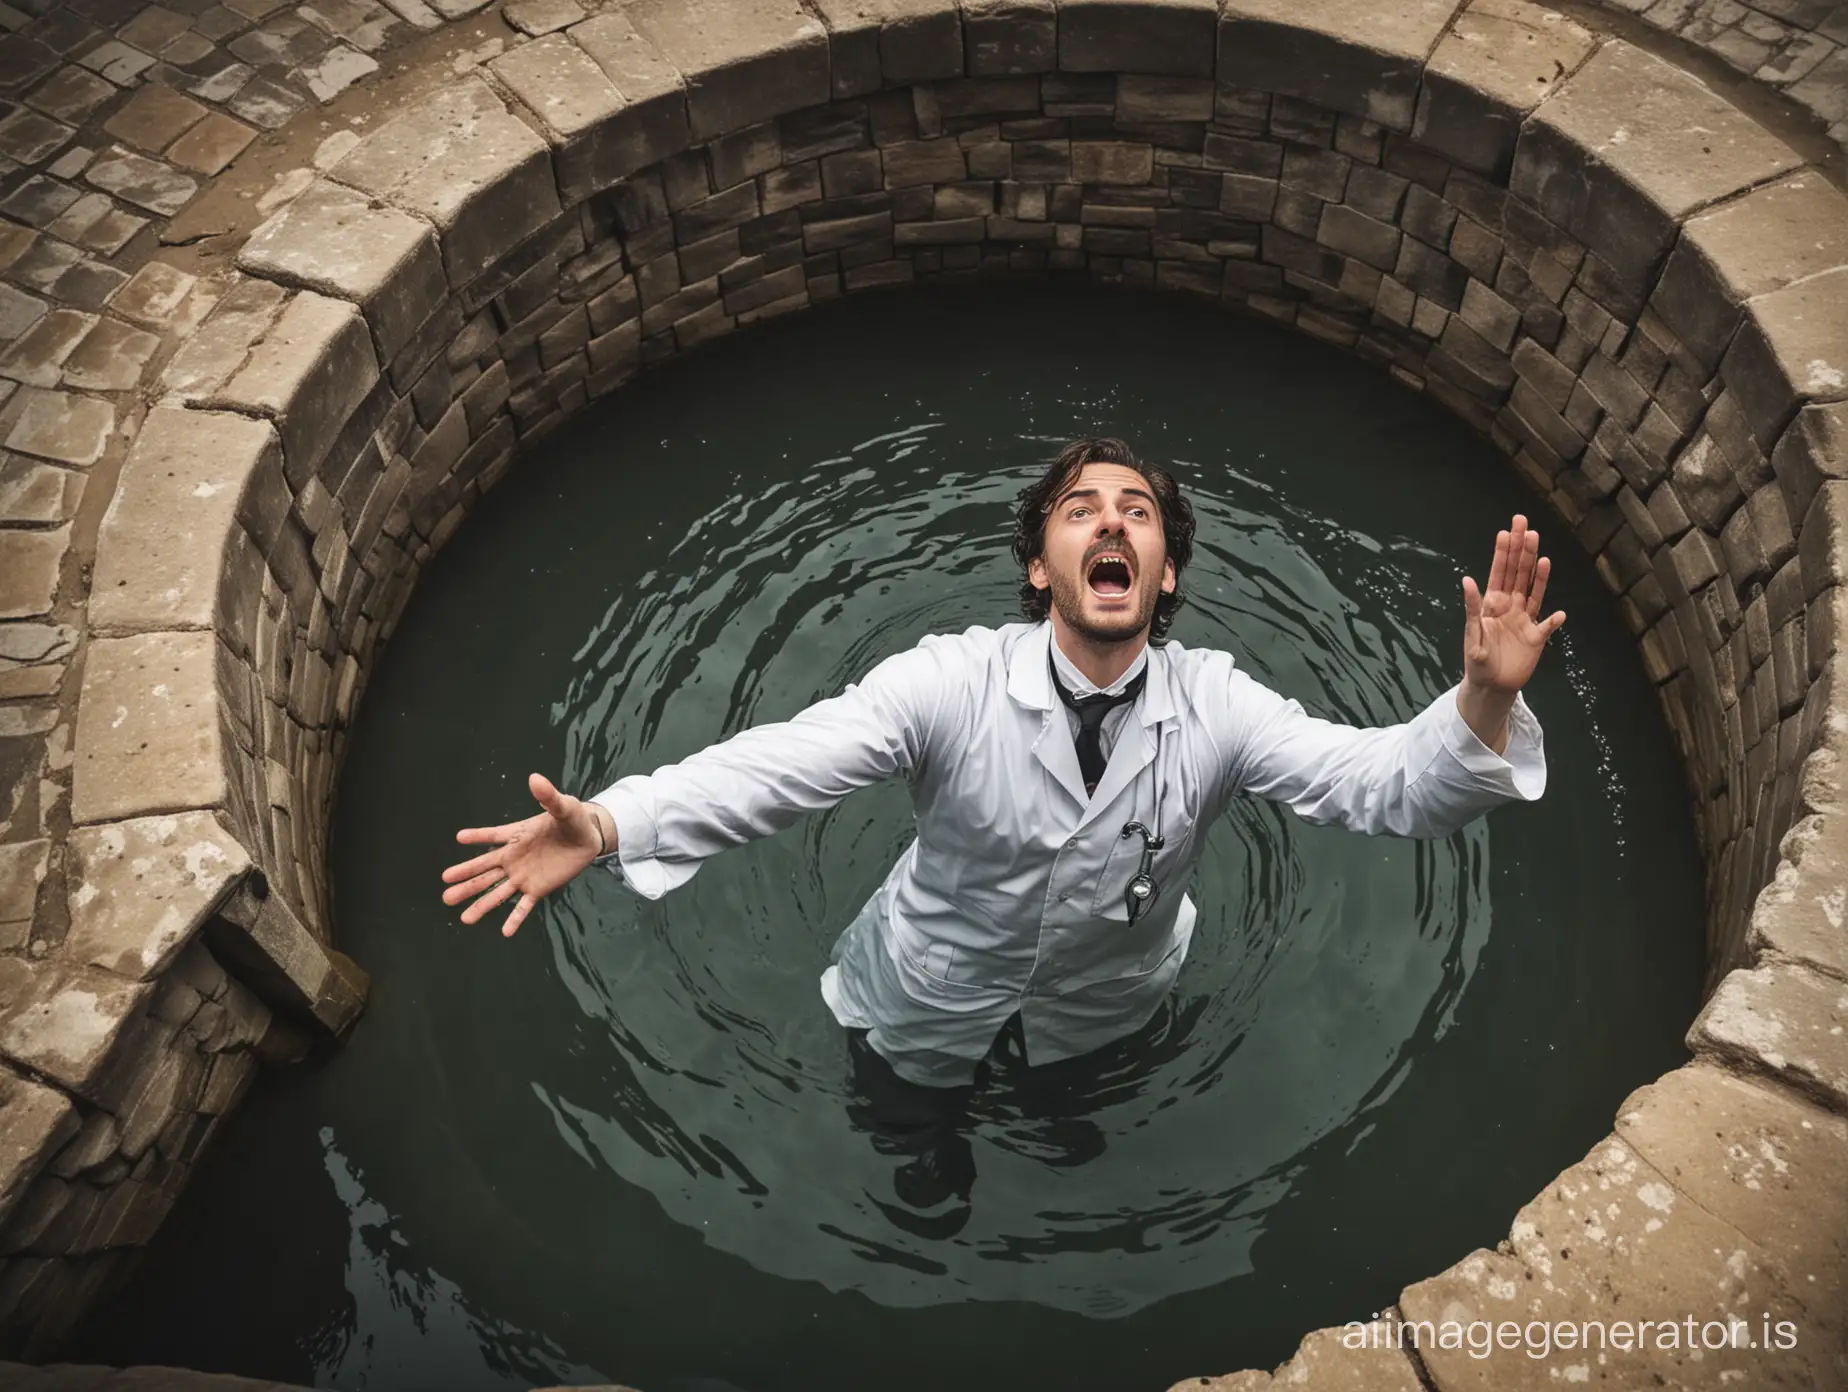 a doctor from baroque drowning into a well